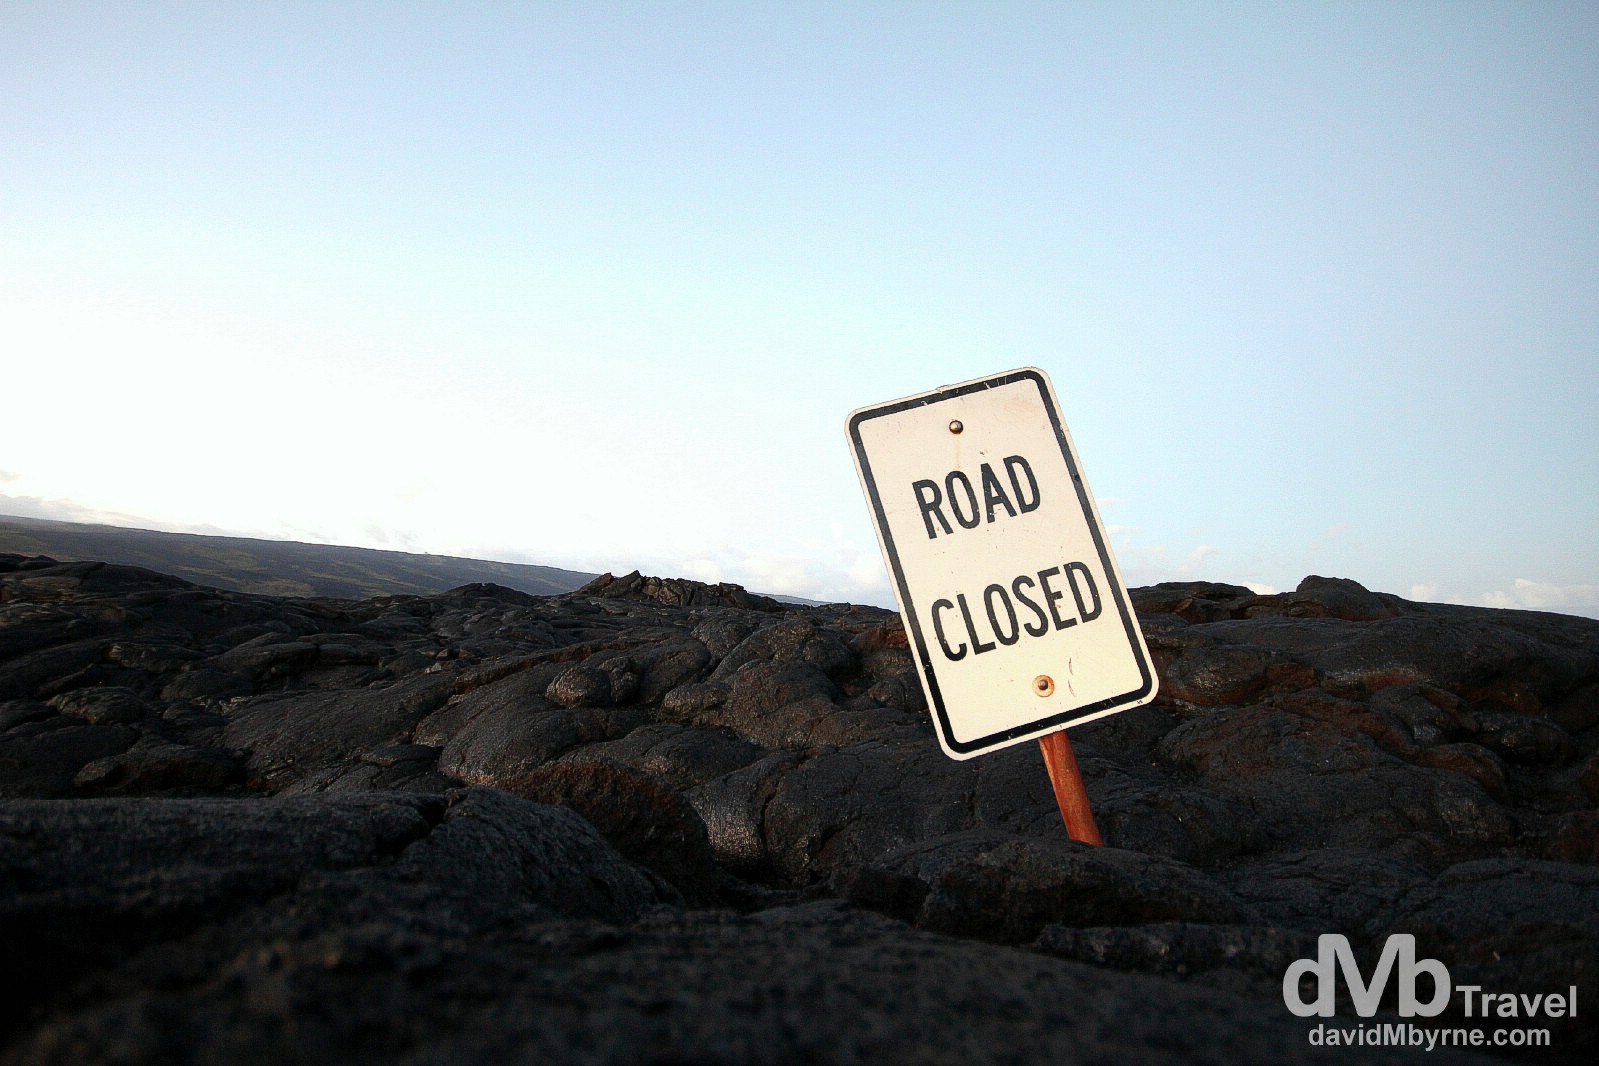 Road closed indeed. A single road sign is all that’s left of a road buried in lava on the south coast of The Big Island, Hawaii. March 1st 2013.